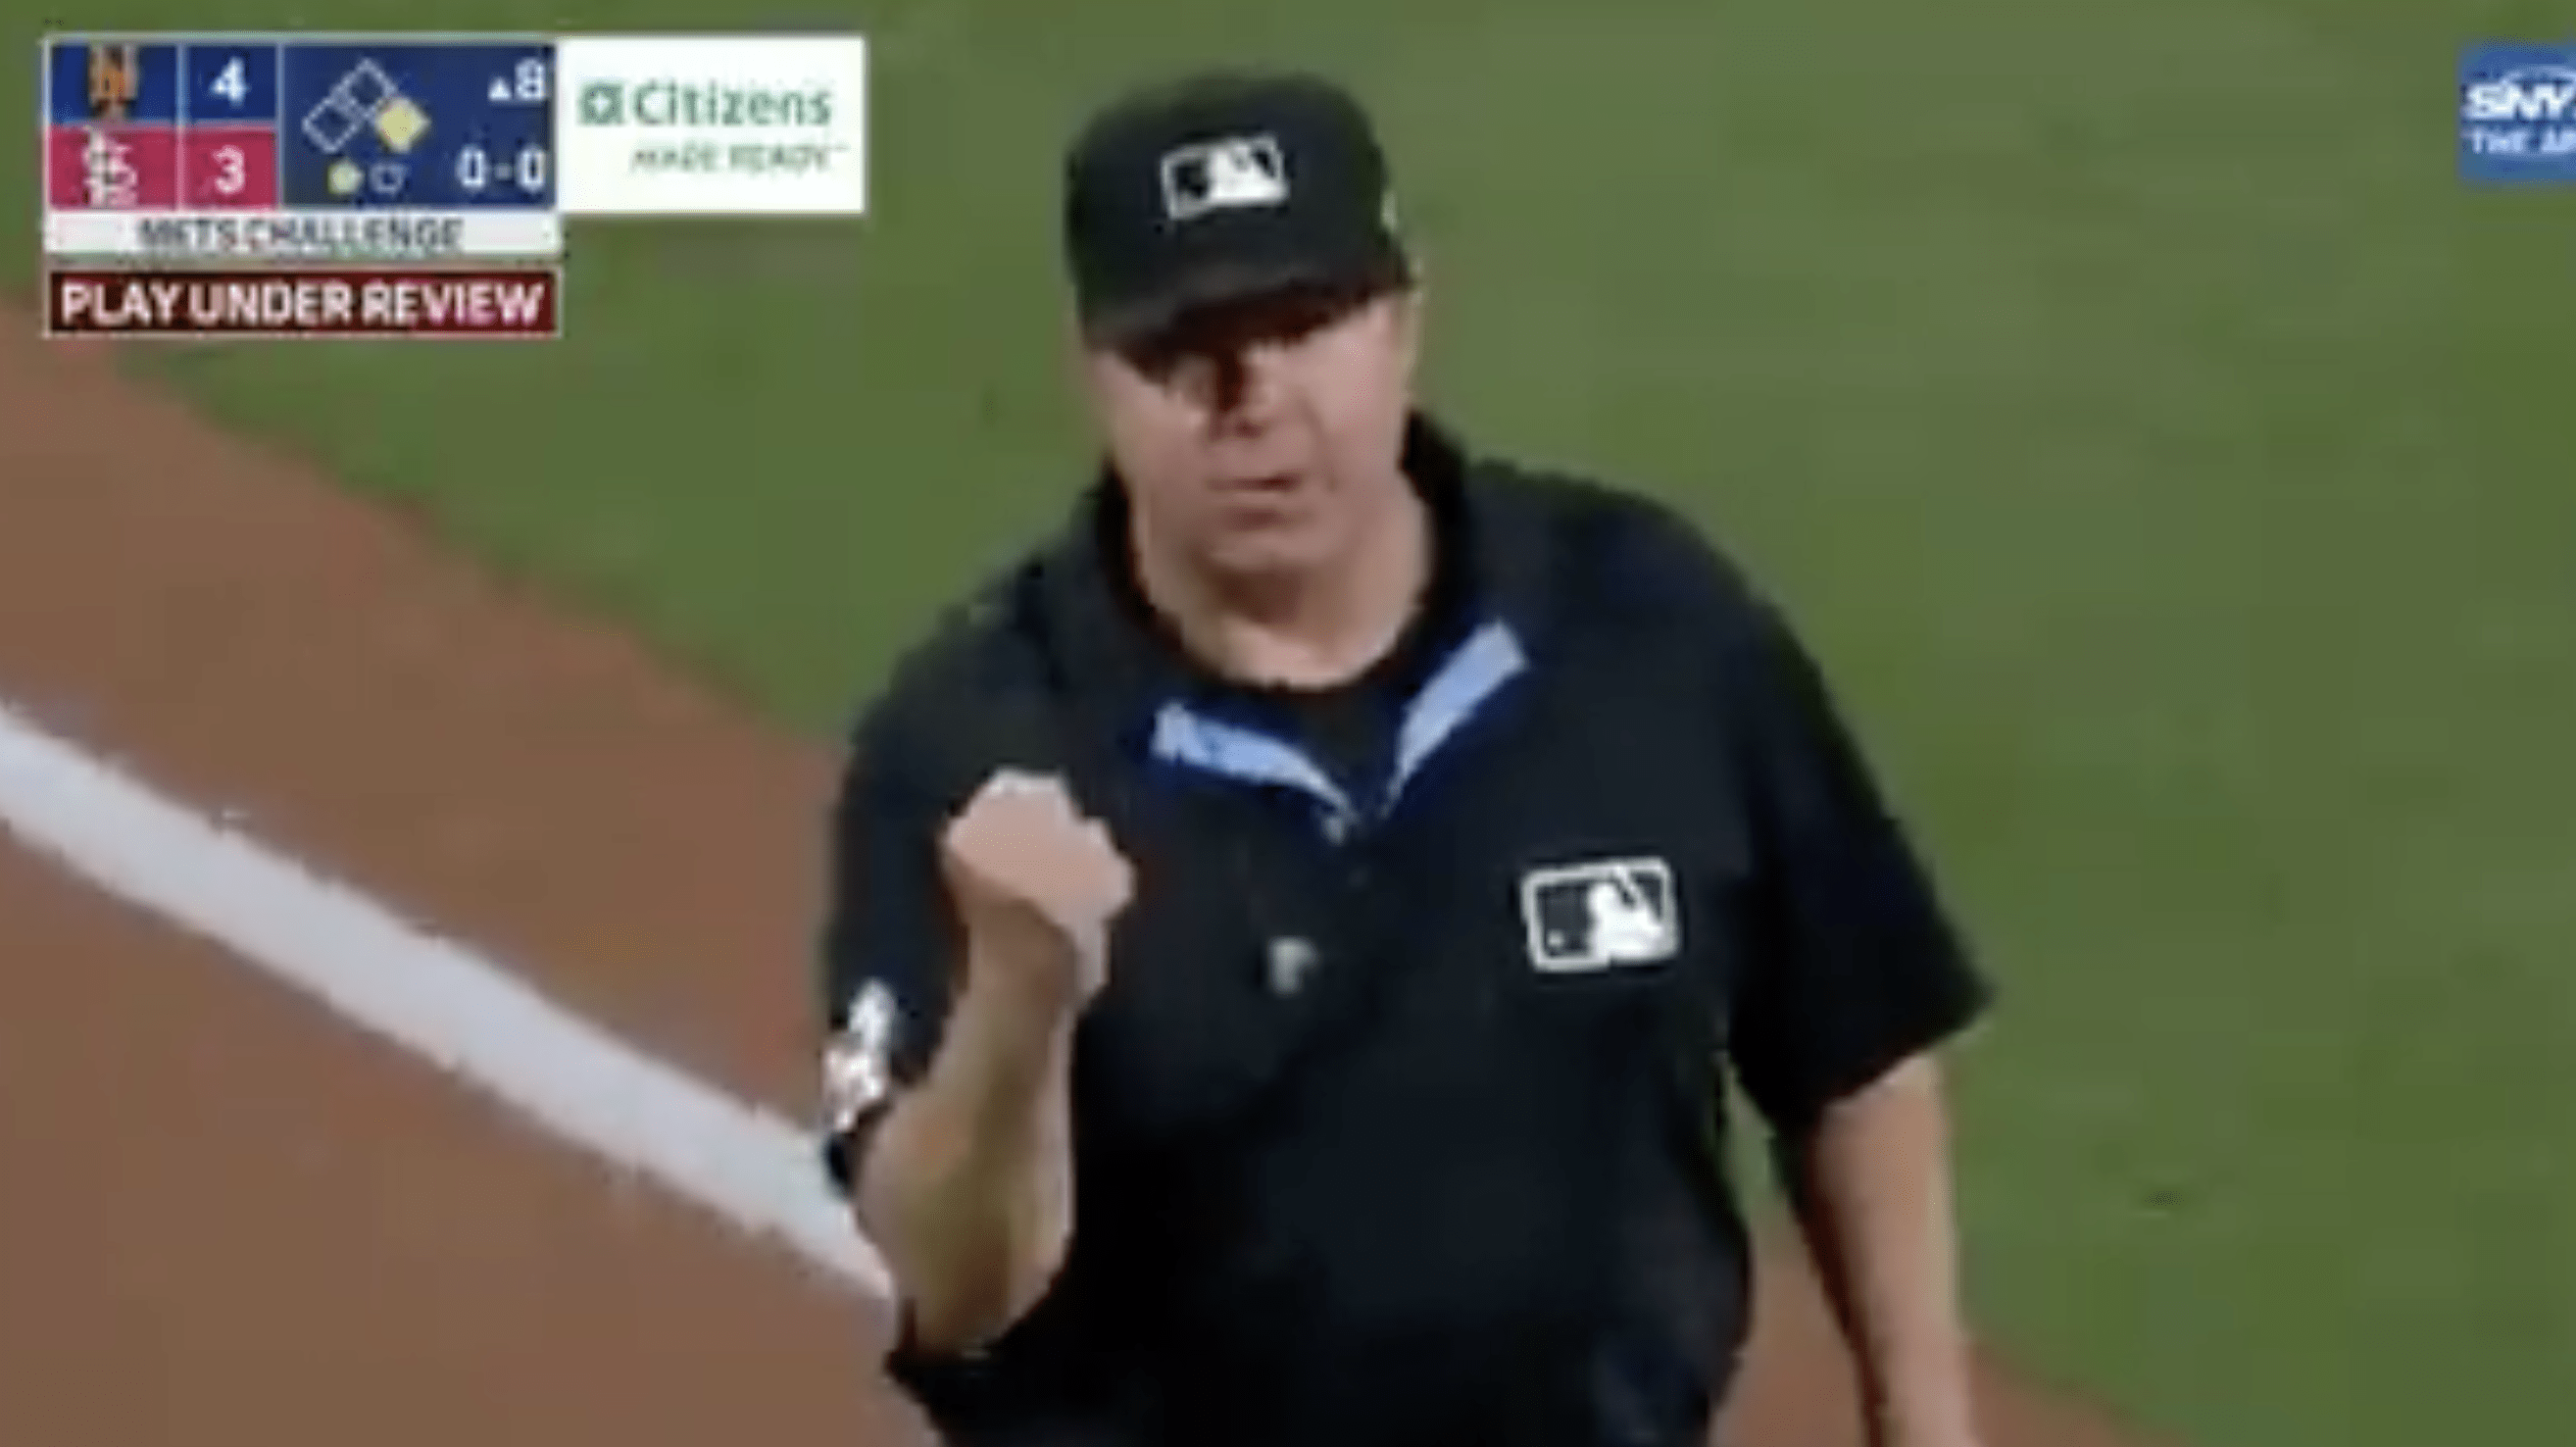 Mets Announcers Had Perfect Reactions to Ump’s Bad Call in Key Moment